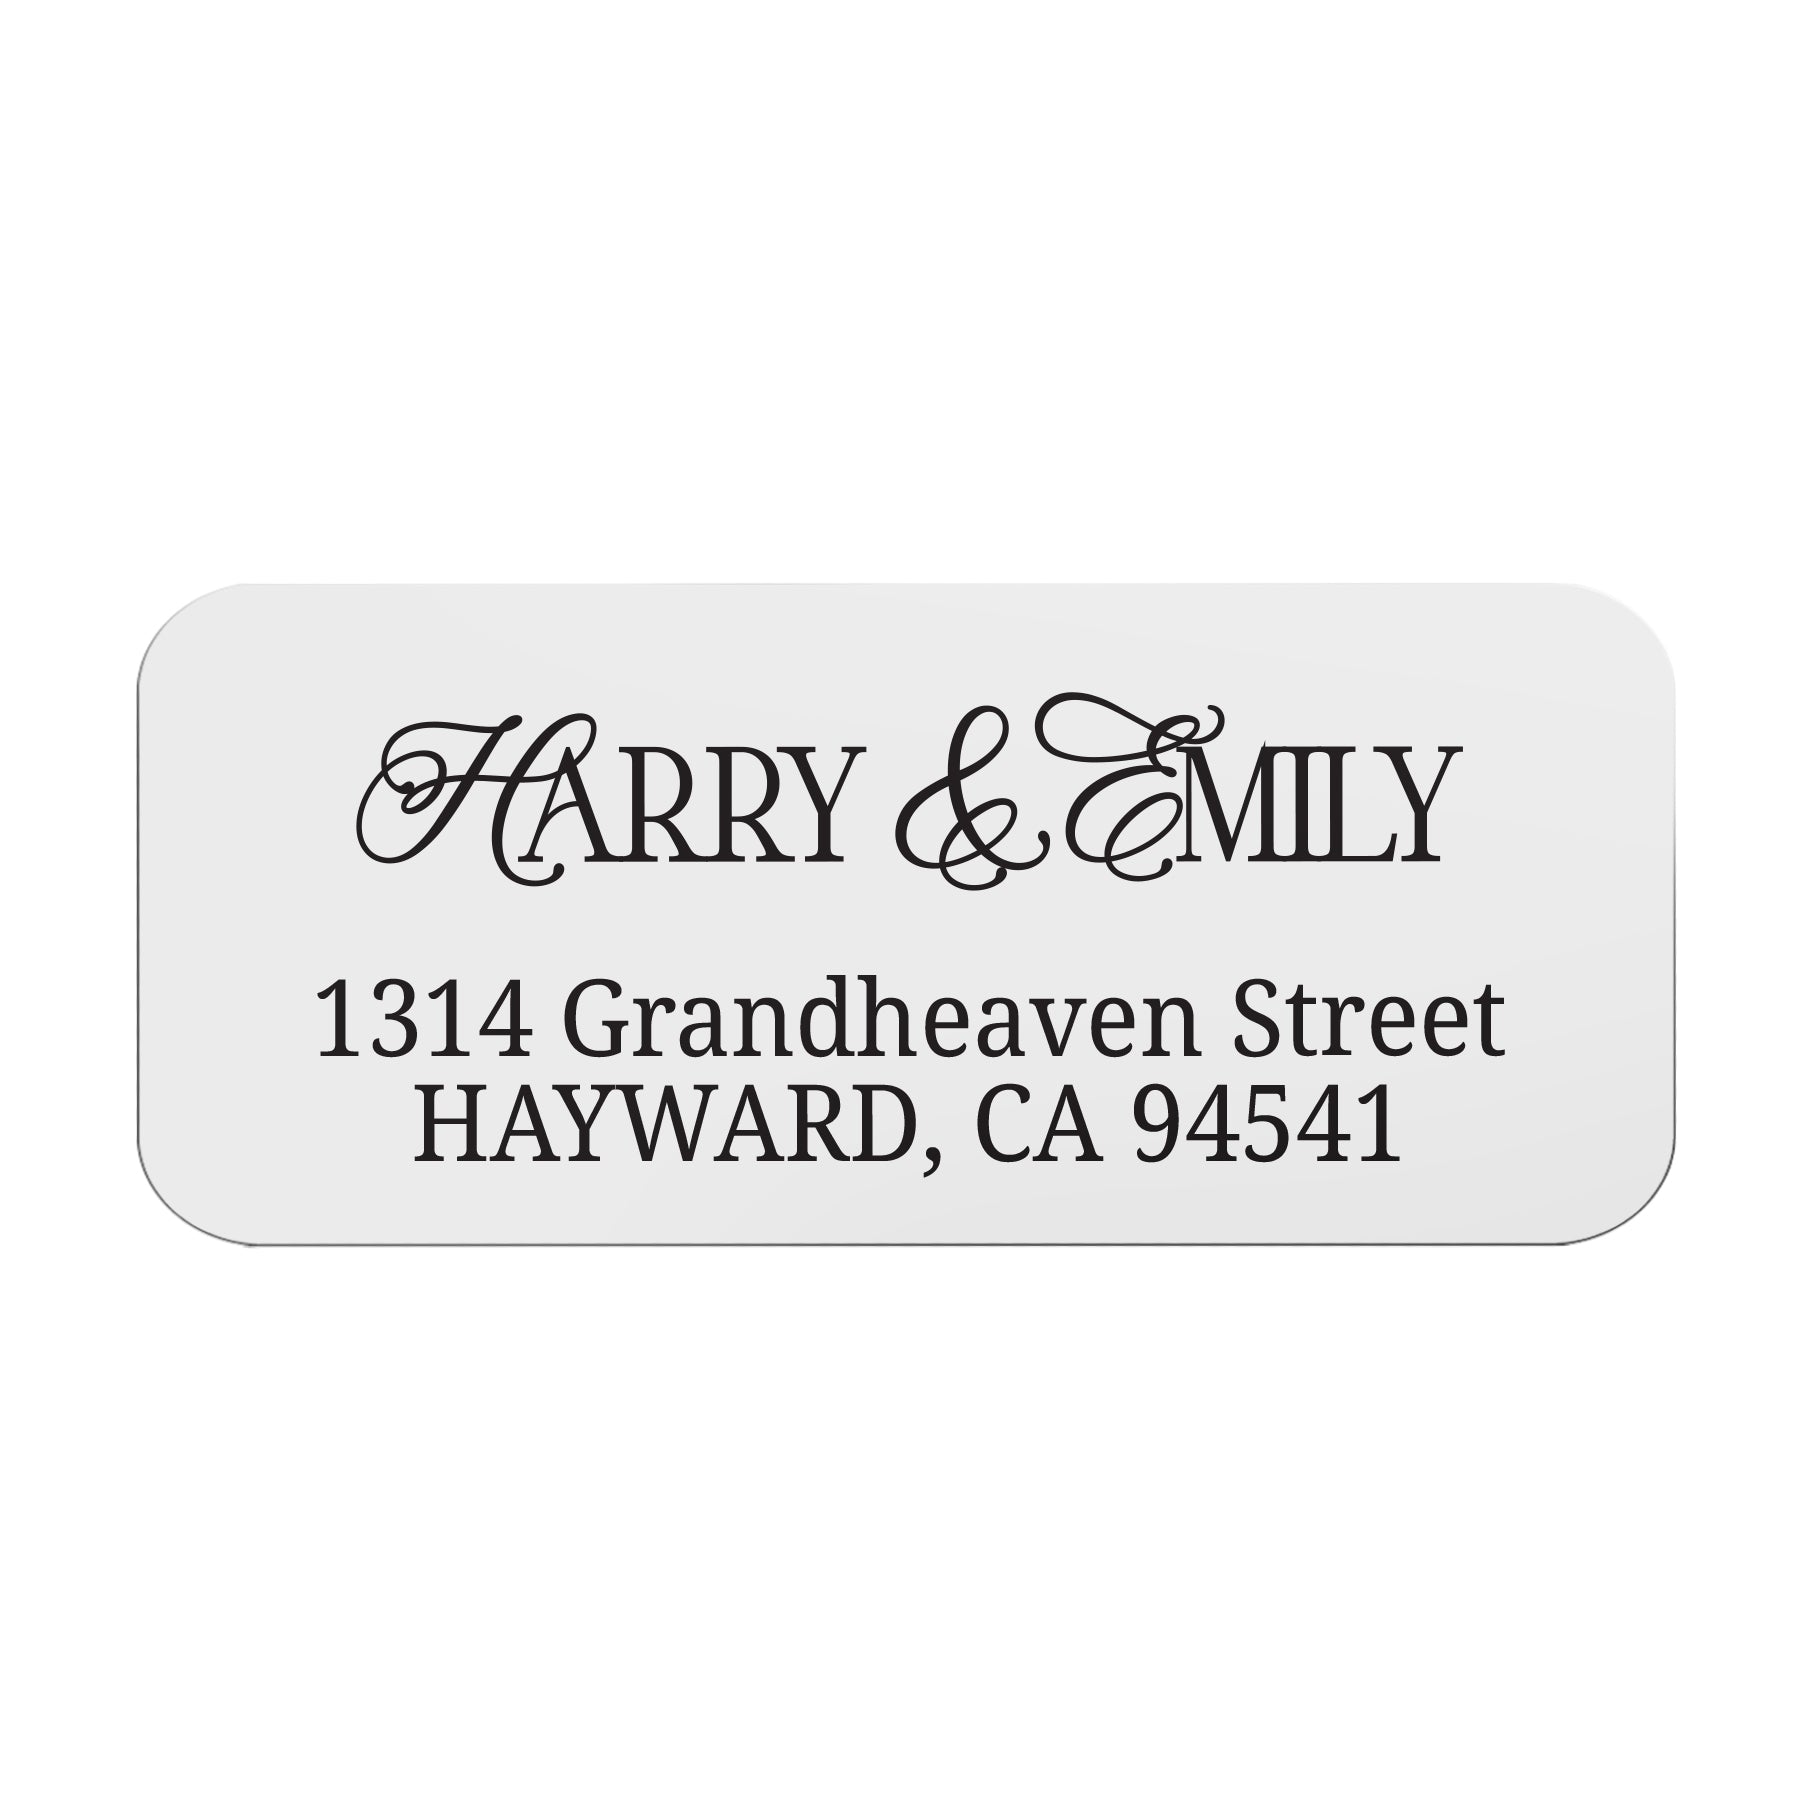 Stylish Return Address Labels for Wedding Stationery - Personalized Design Options - Classic Black Ink - Easy-to-Apply Clear Self-Adhesive Pape